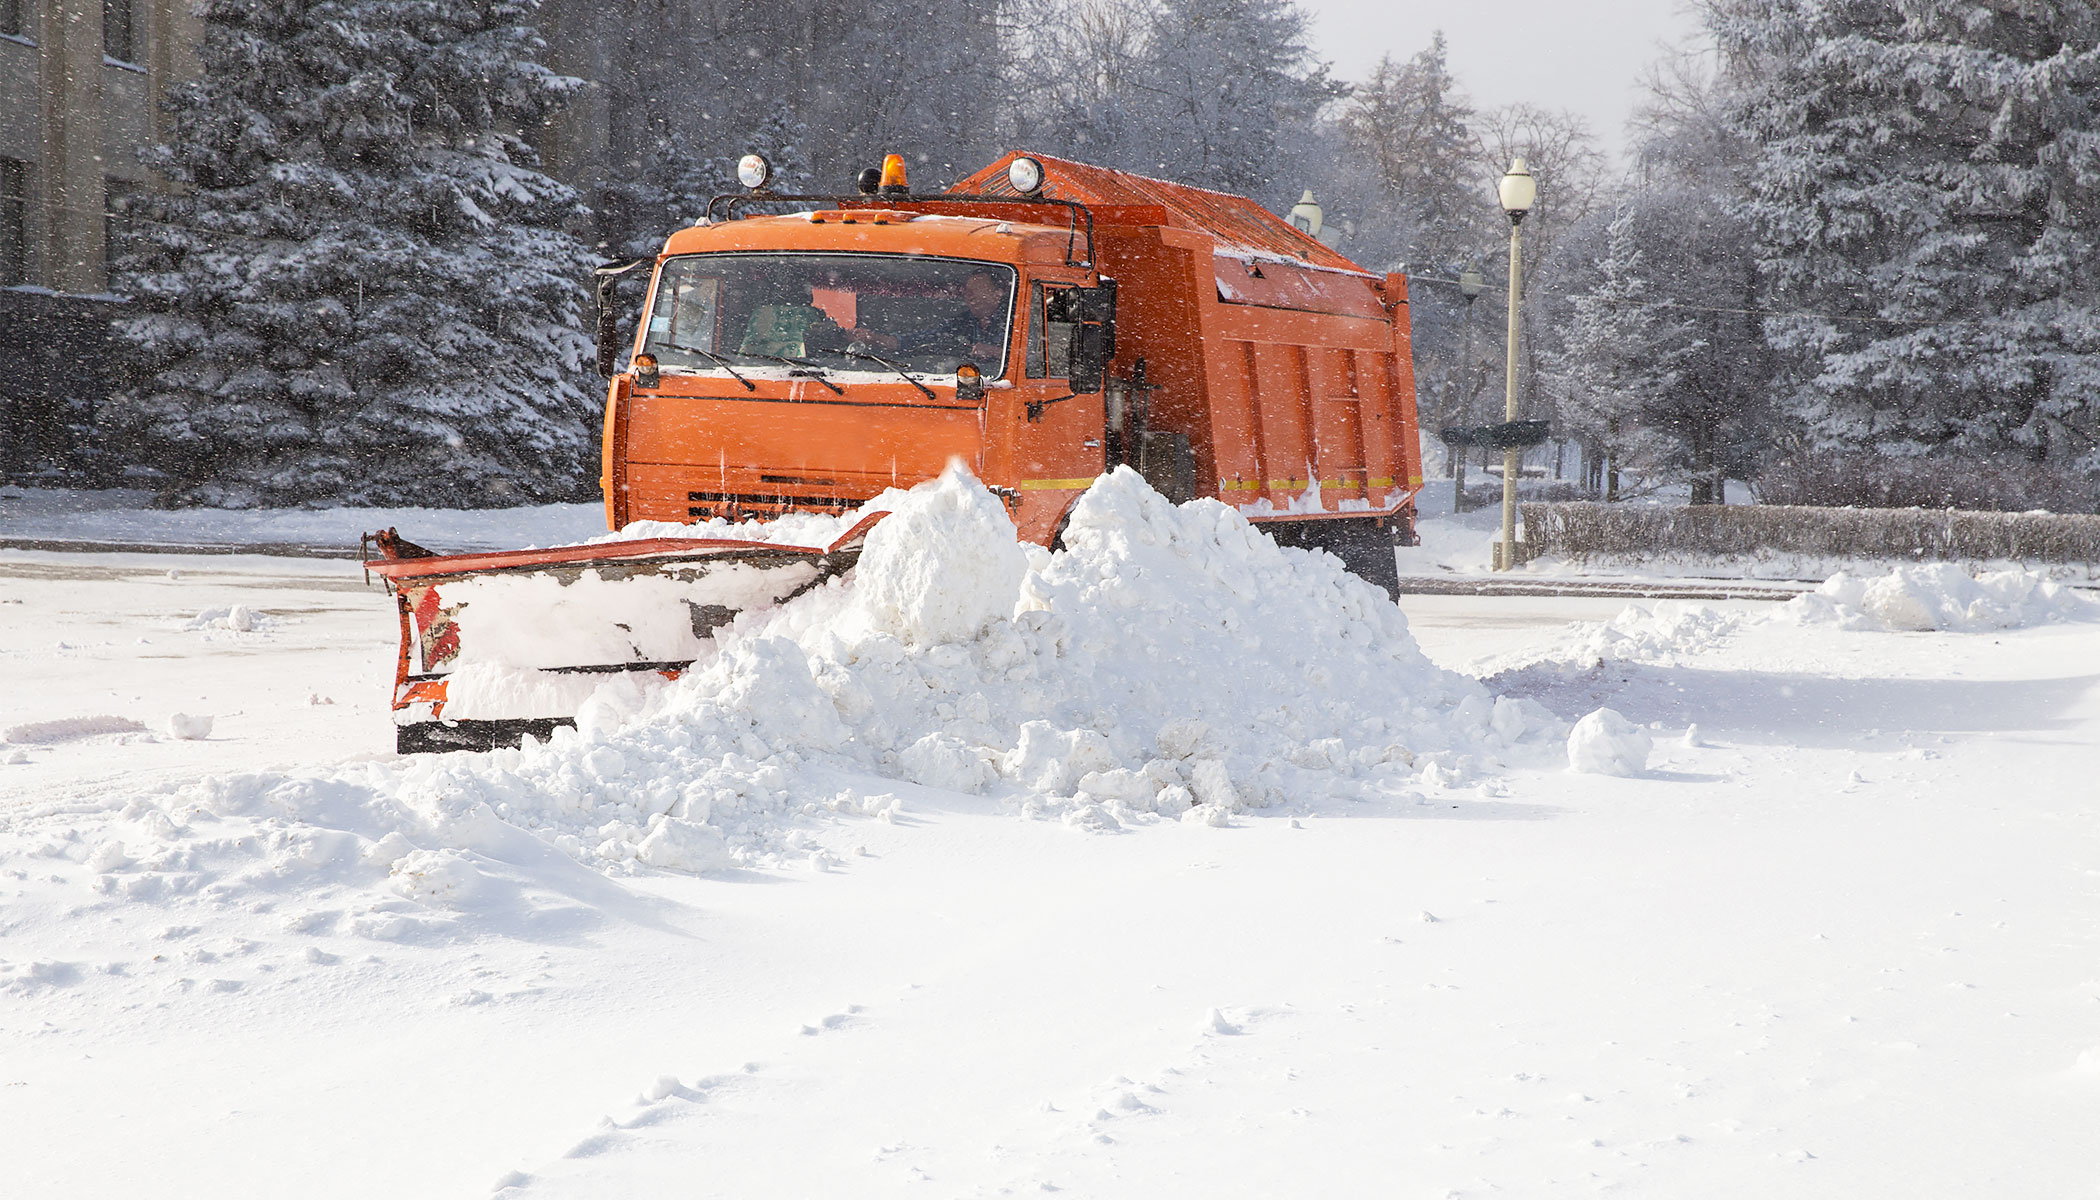 Plowing snow - winter moving tips